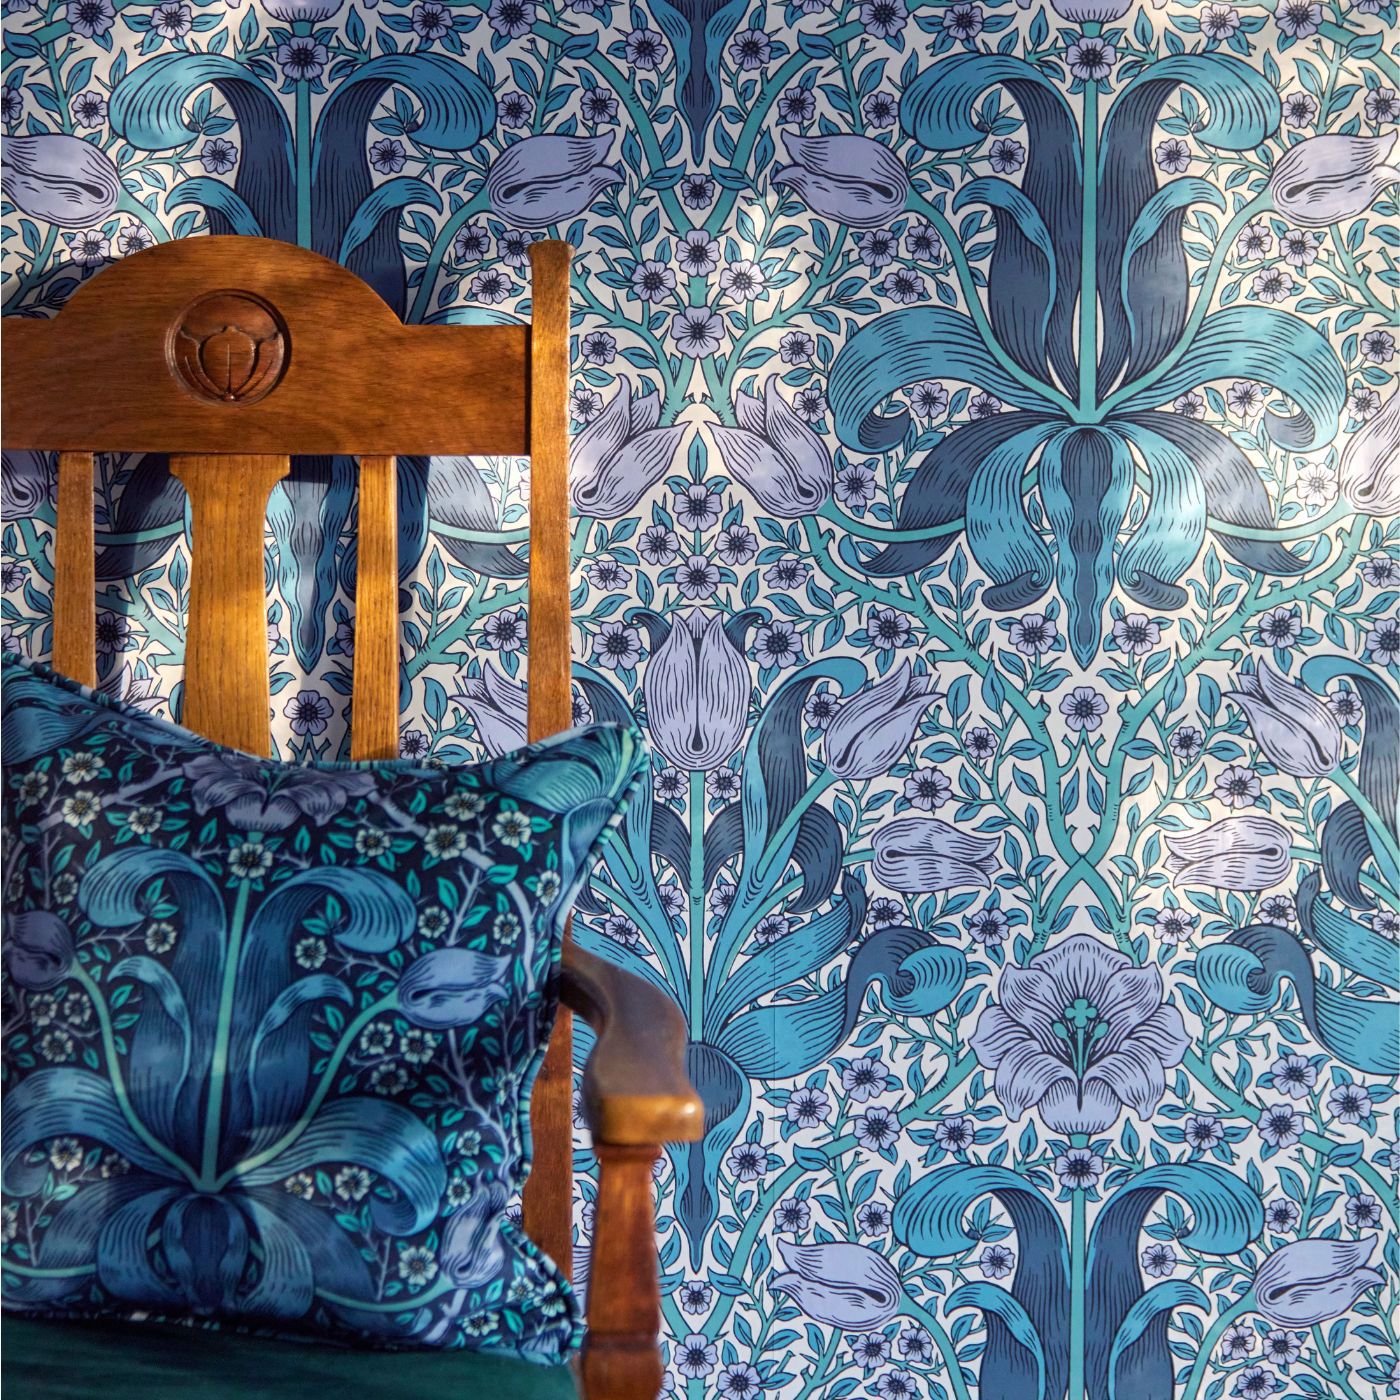 Spring Thicket is William Morris's last pattern made for wallpaper in 1894. Amazing how something so classic can feel so modern too. #wallpaper #morrisandco #floralwallpaper #classicwallpaper #walldecor #wallpaperdecor